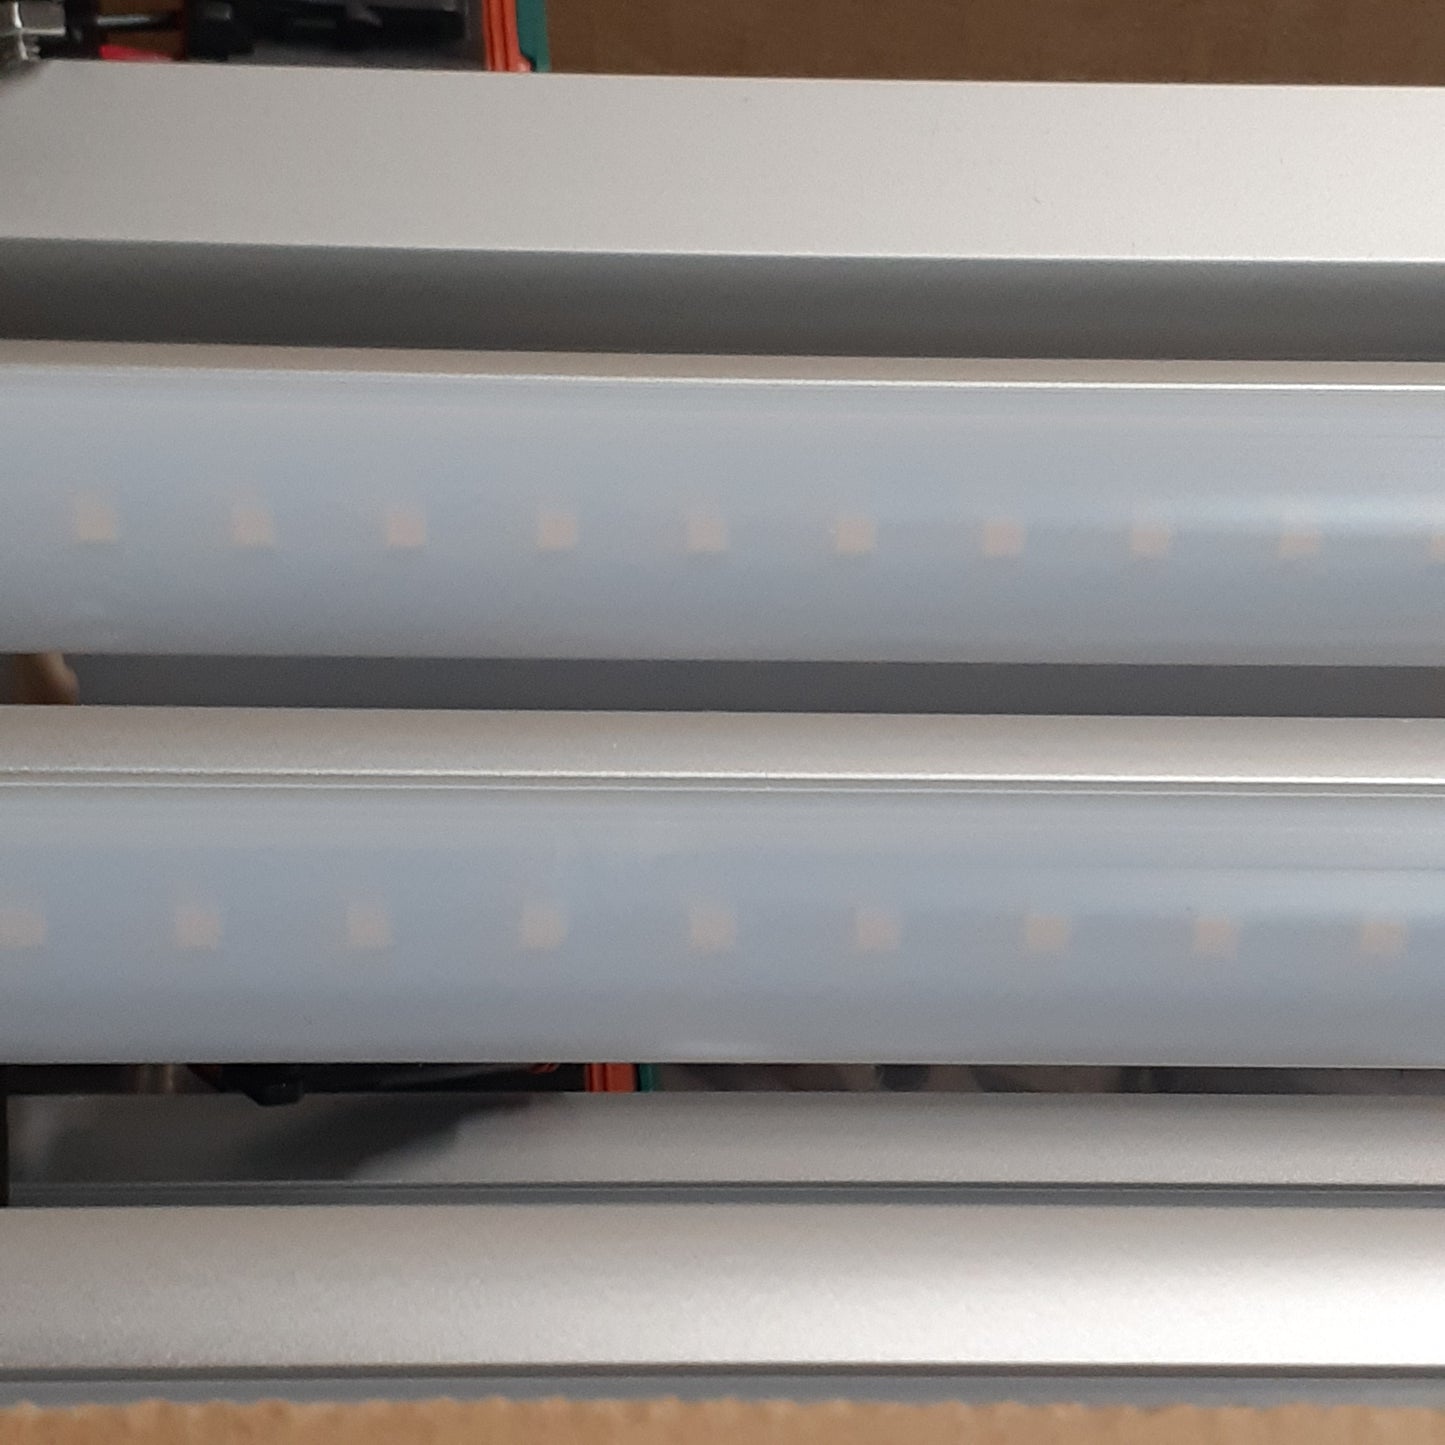 I2Systems 10-Pack! Indoor LED Linear Lighting System 48” with Wall Mounts E465738 (New)